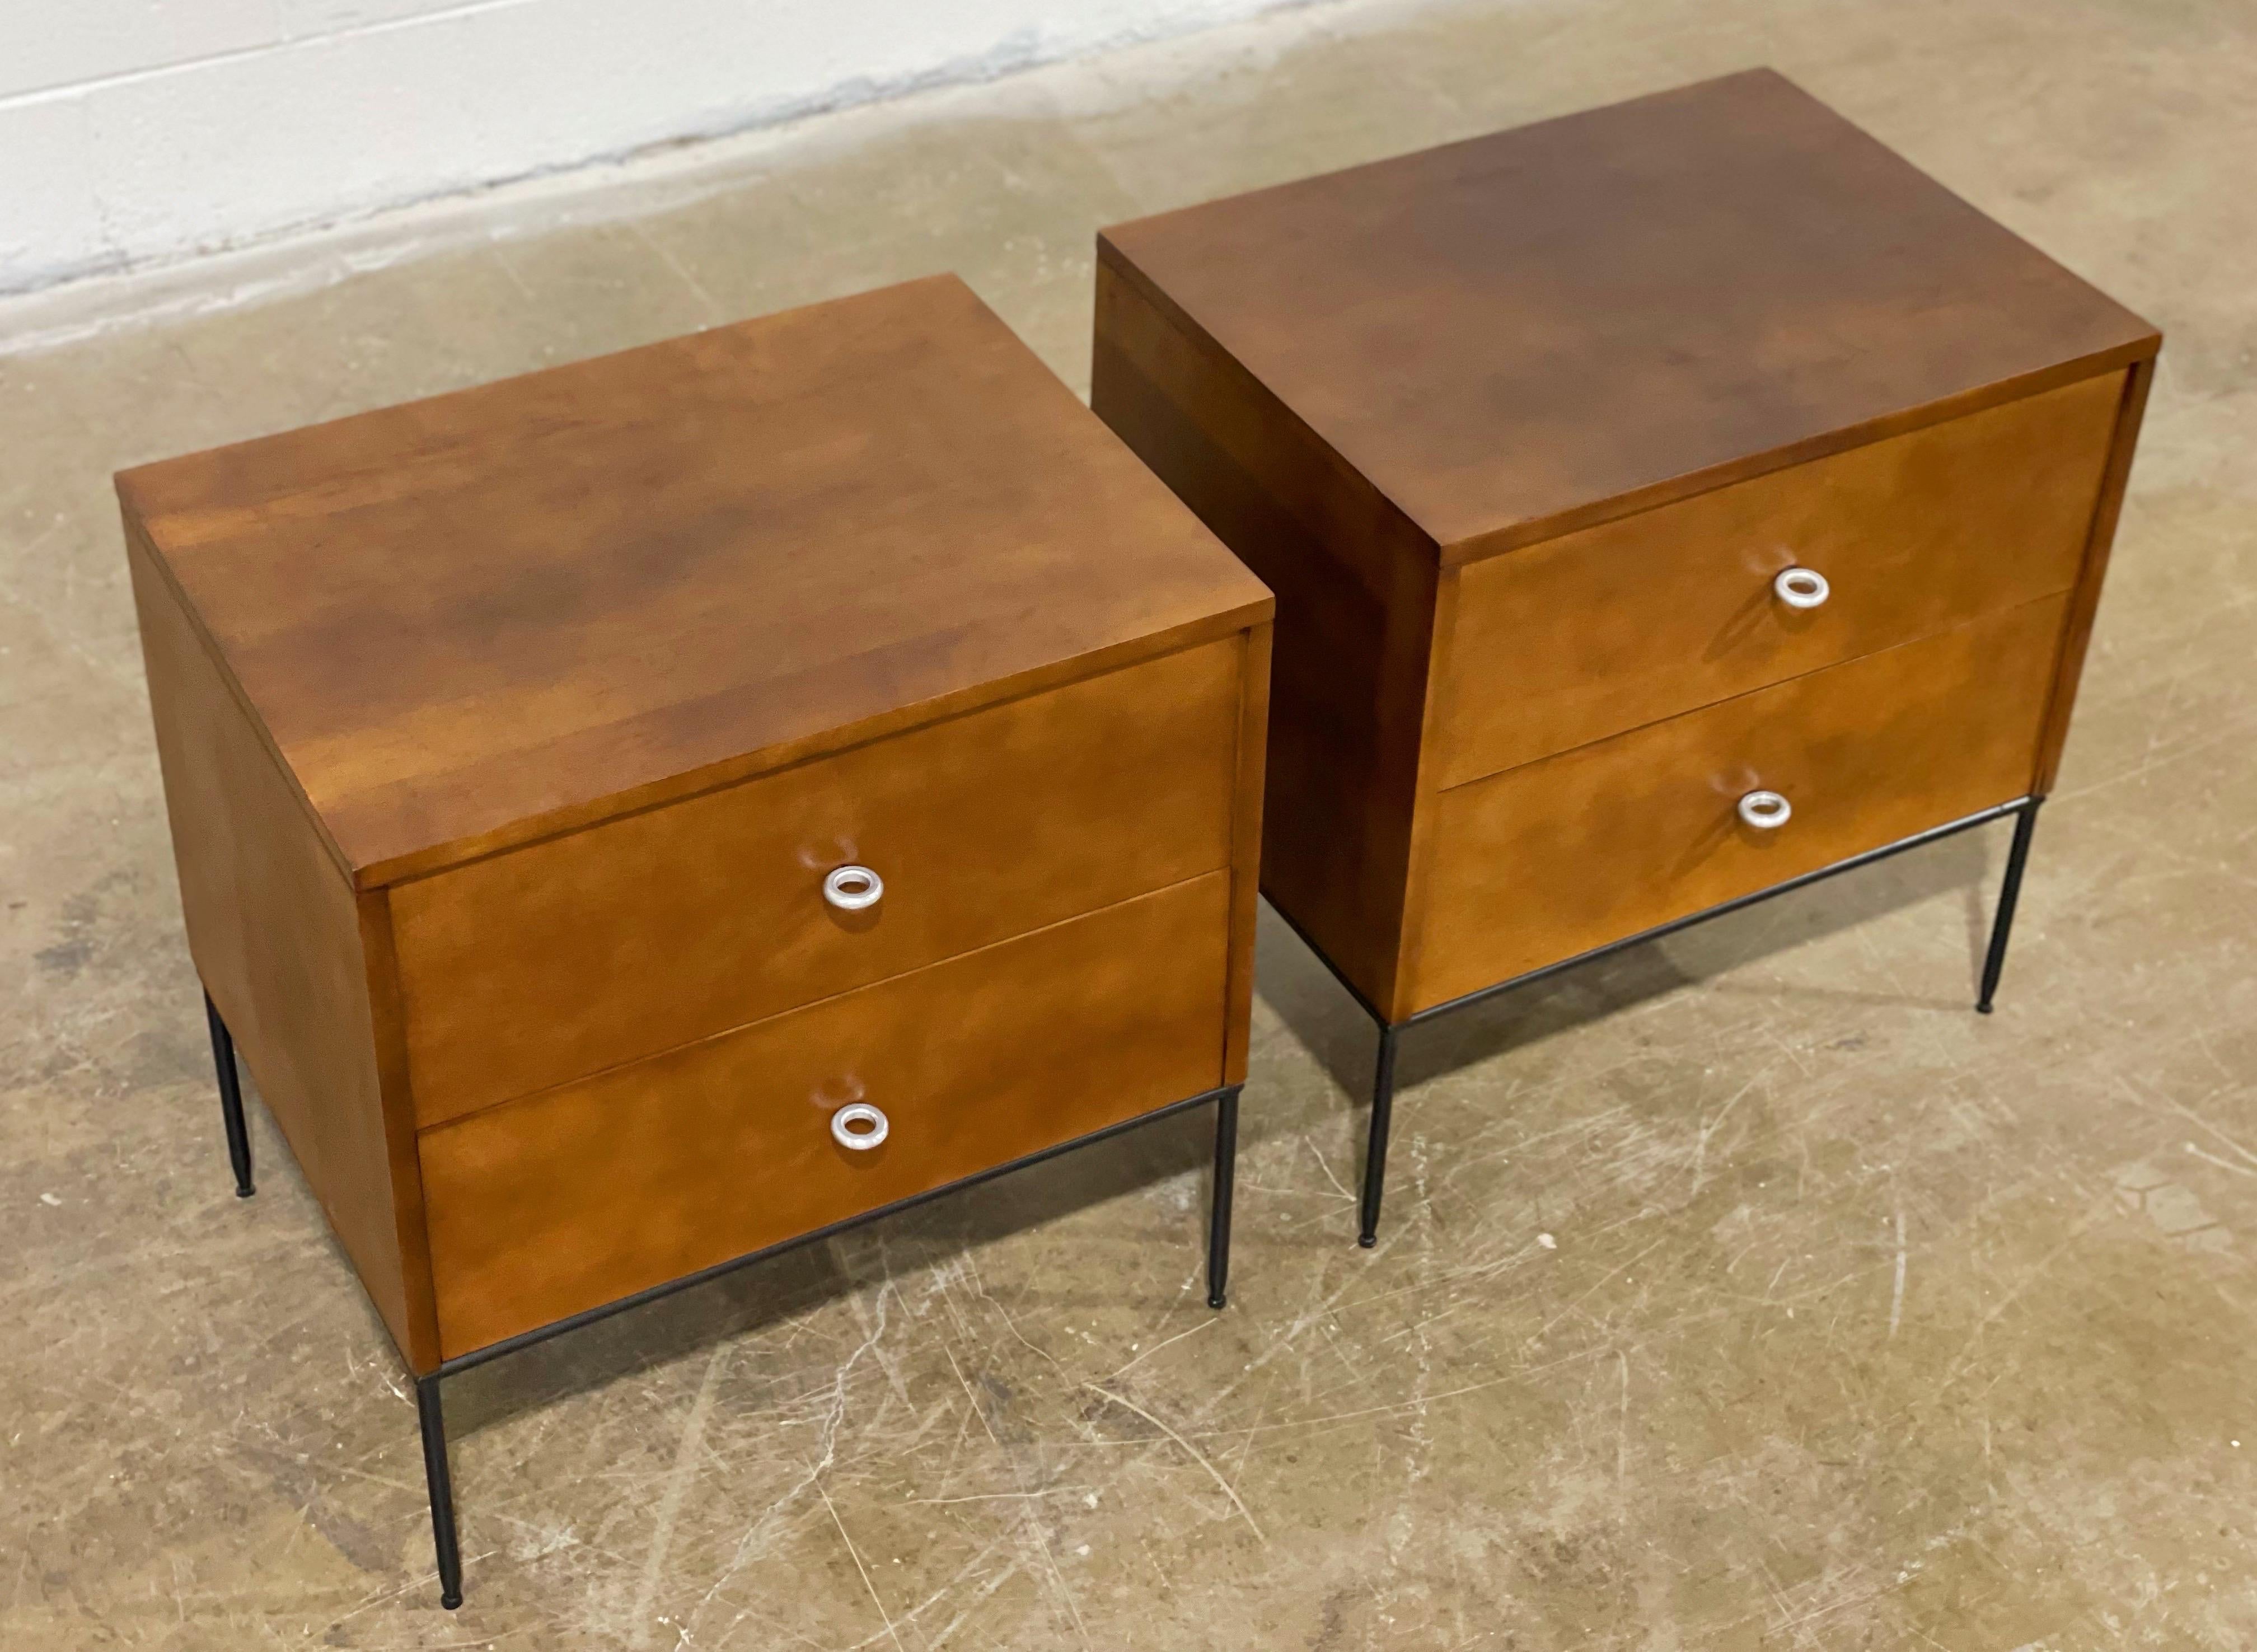 Midcentury Paul McCobb Nightstands #1503, Two Drawer on Iron Bases O-Ring Pulls 6